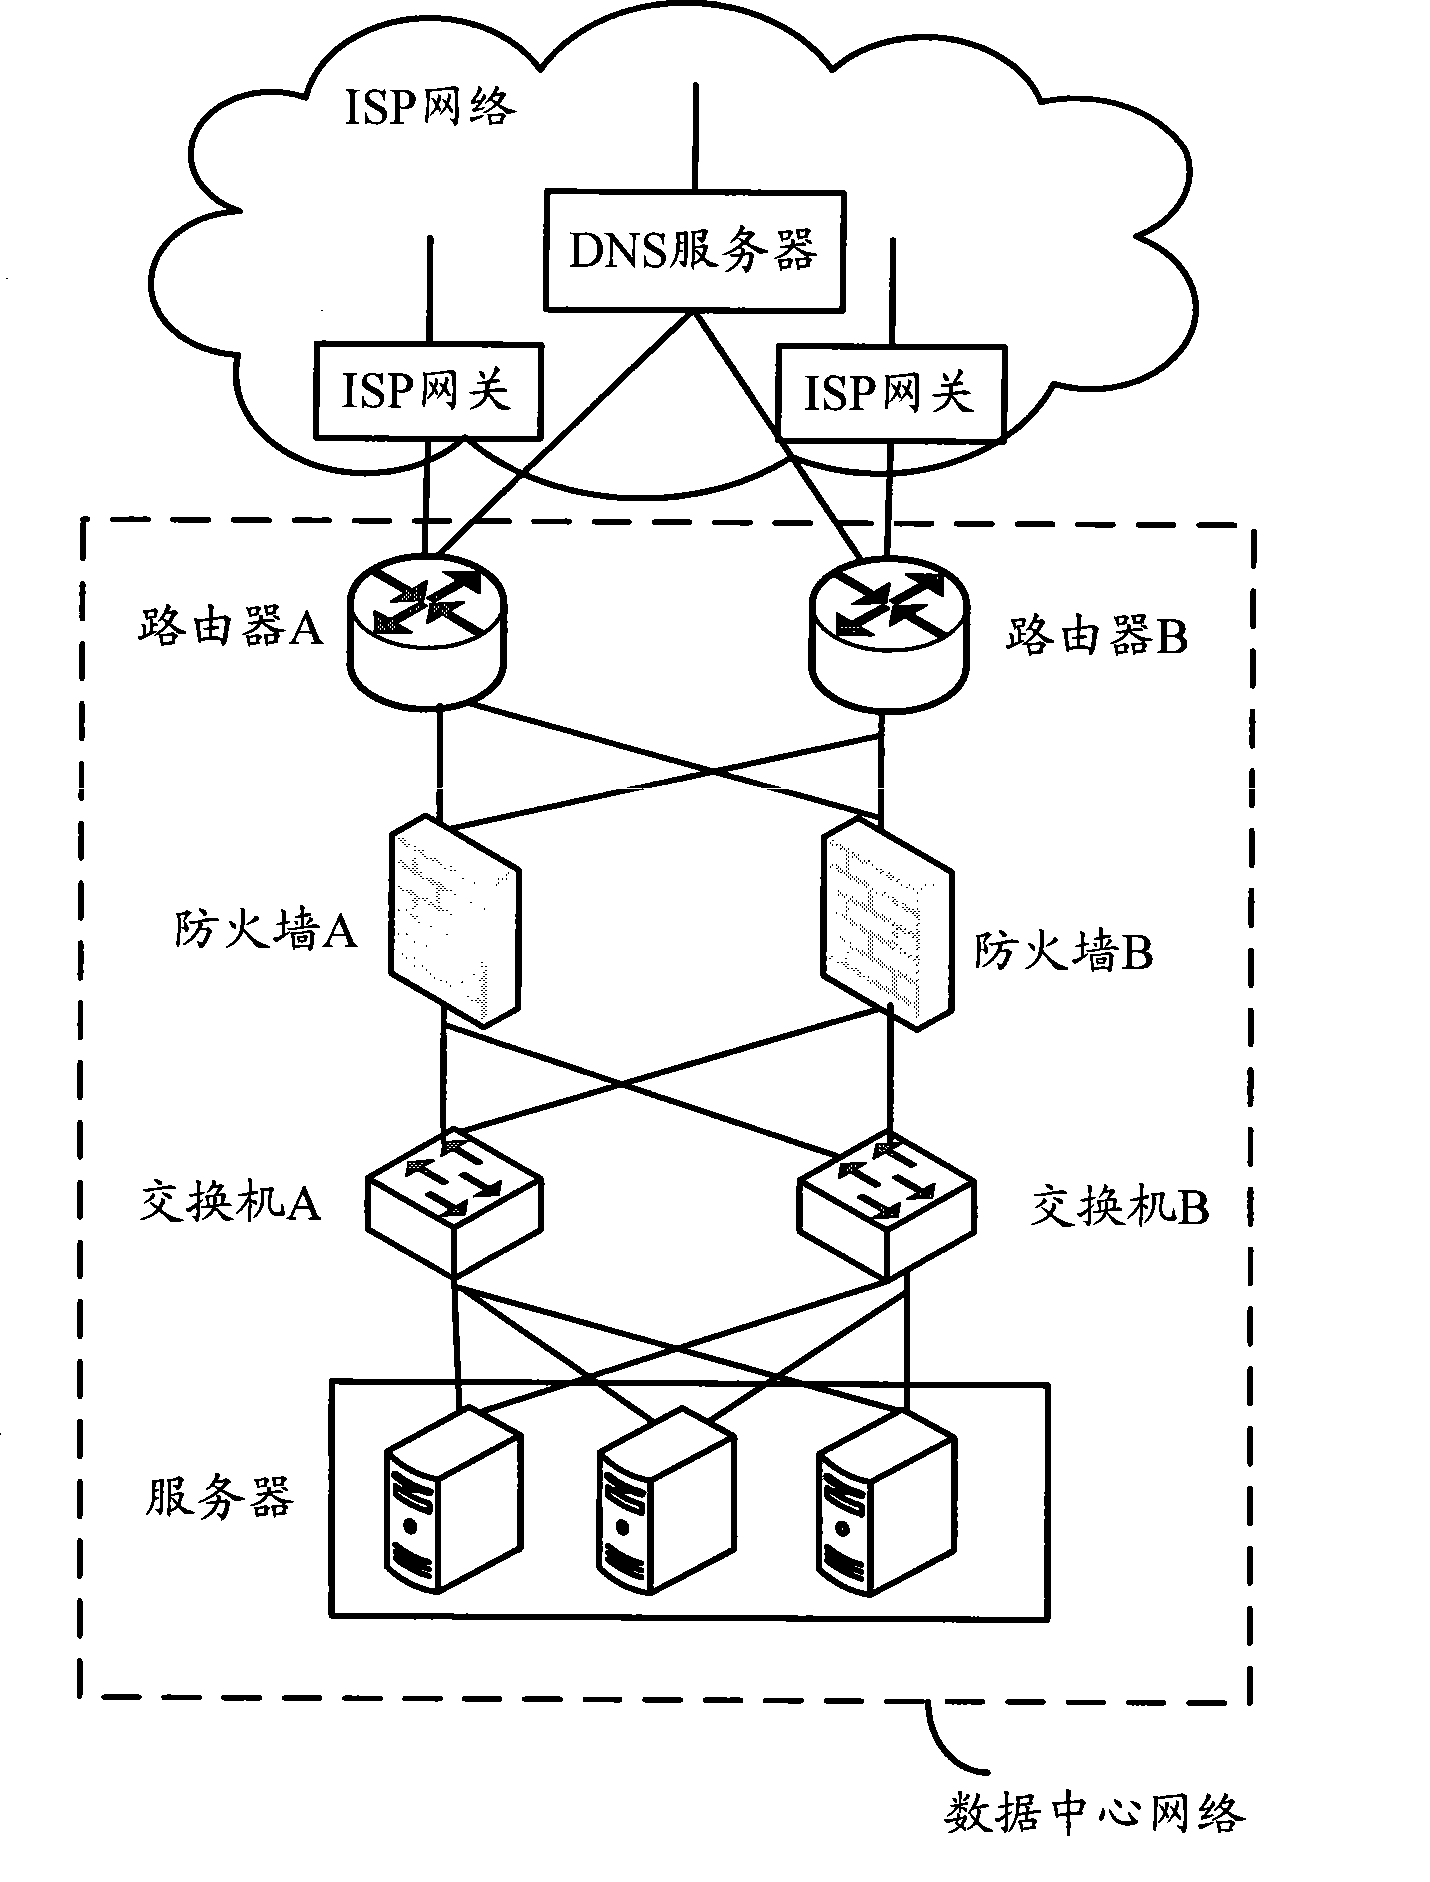 Packet transmission method based on network dual exit and exit router